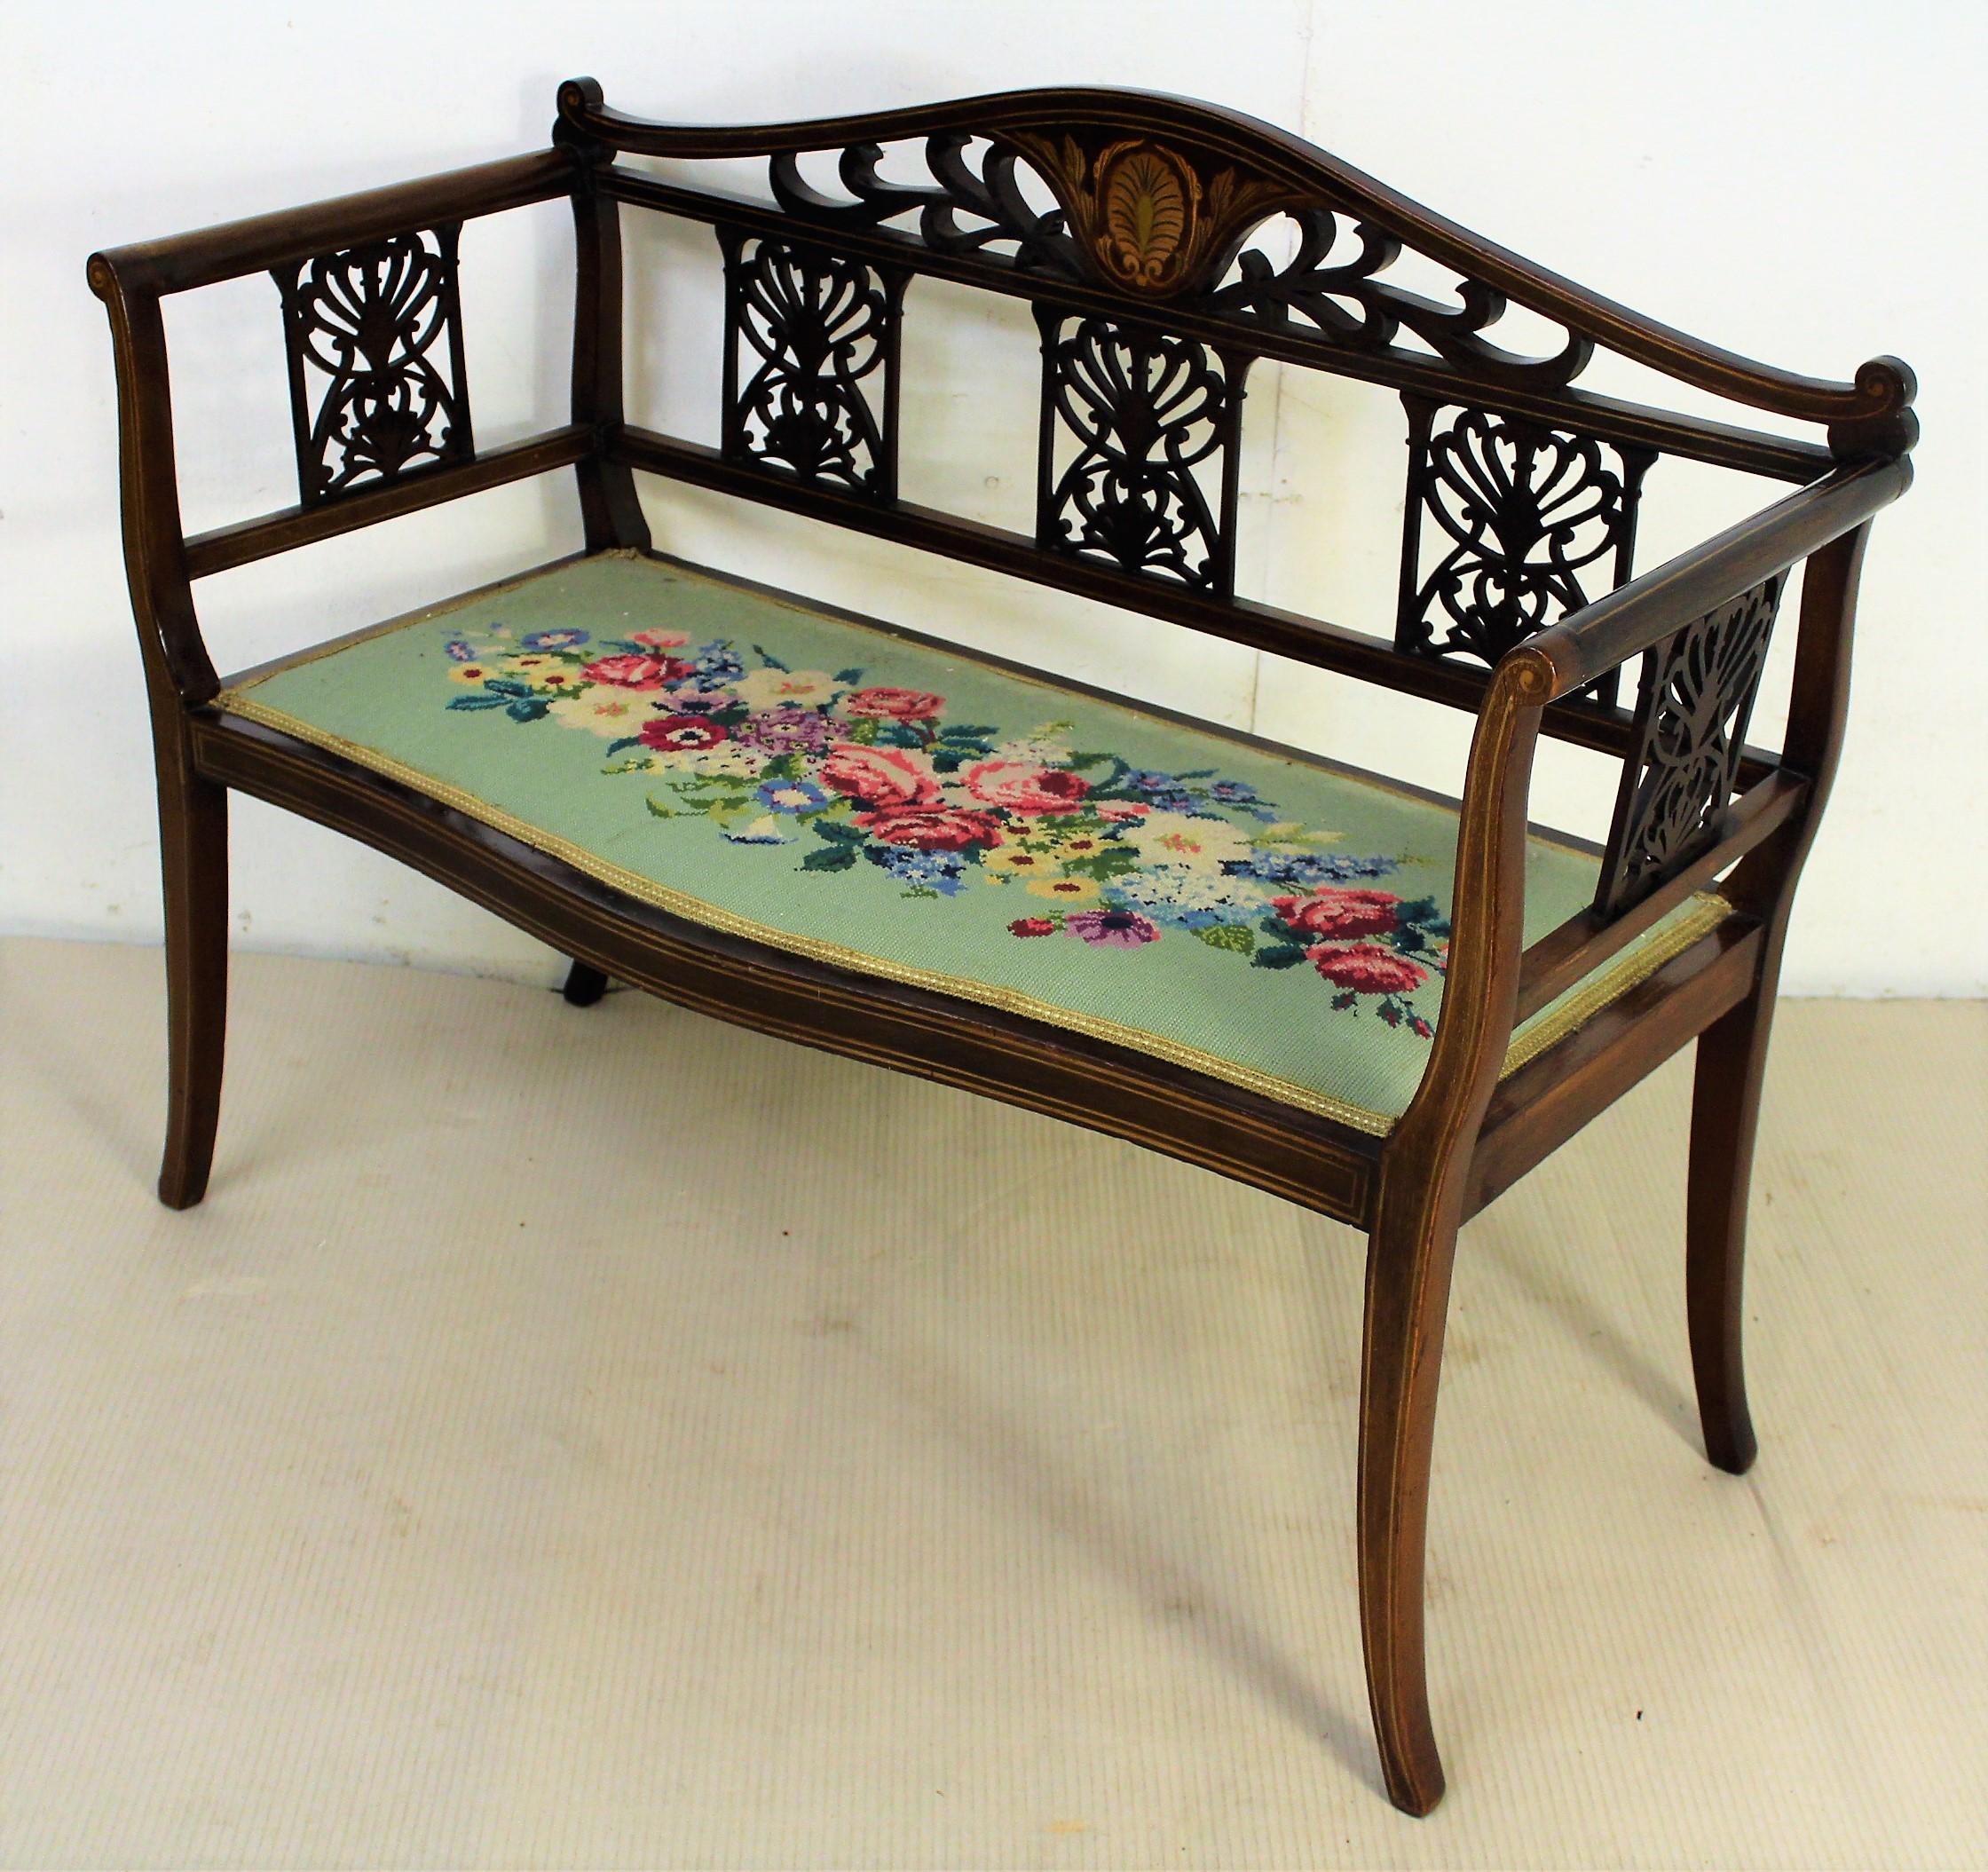 English Edwardian Period Inlaid Mahogany Settee or Bench For Sale 3